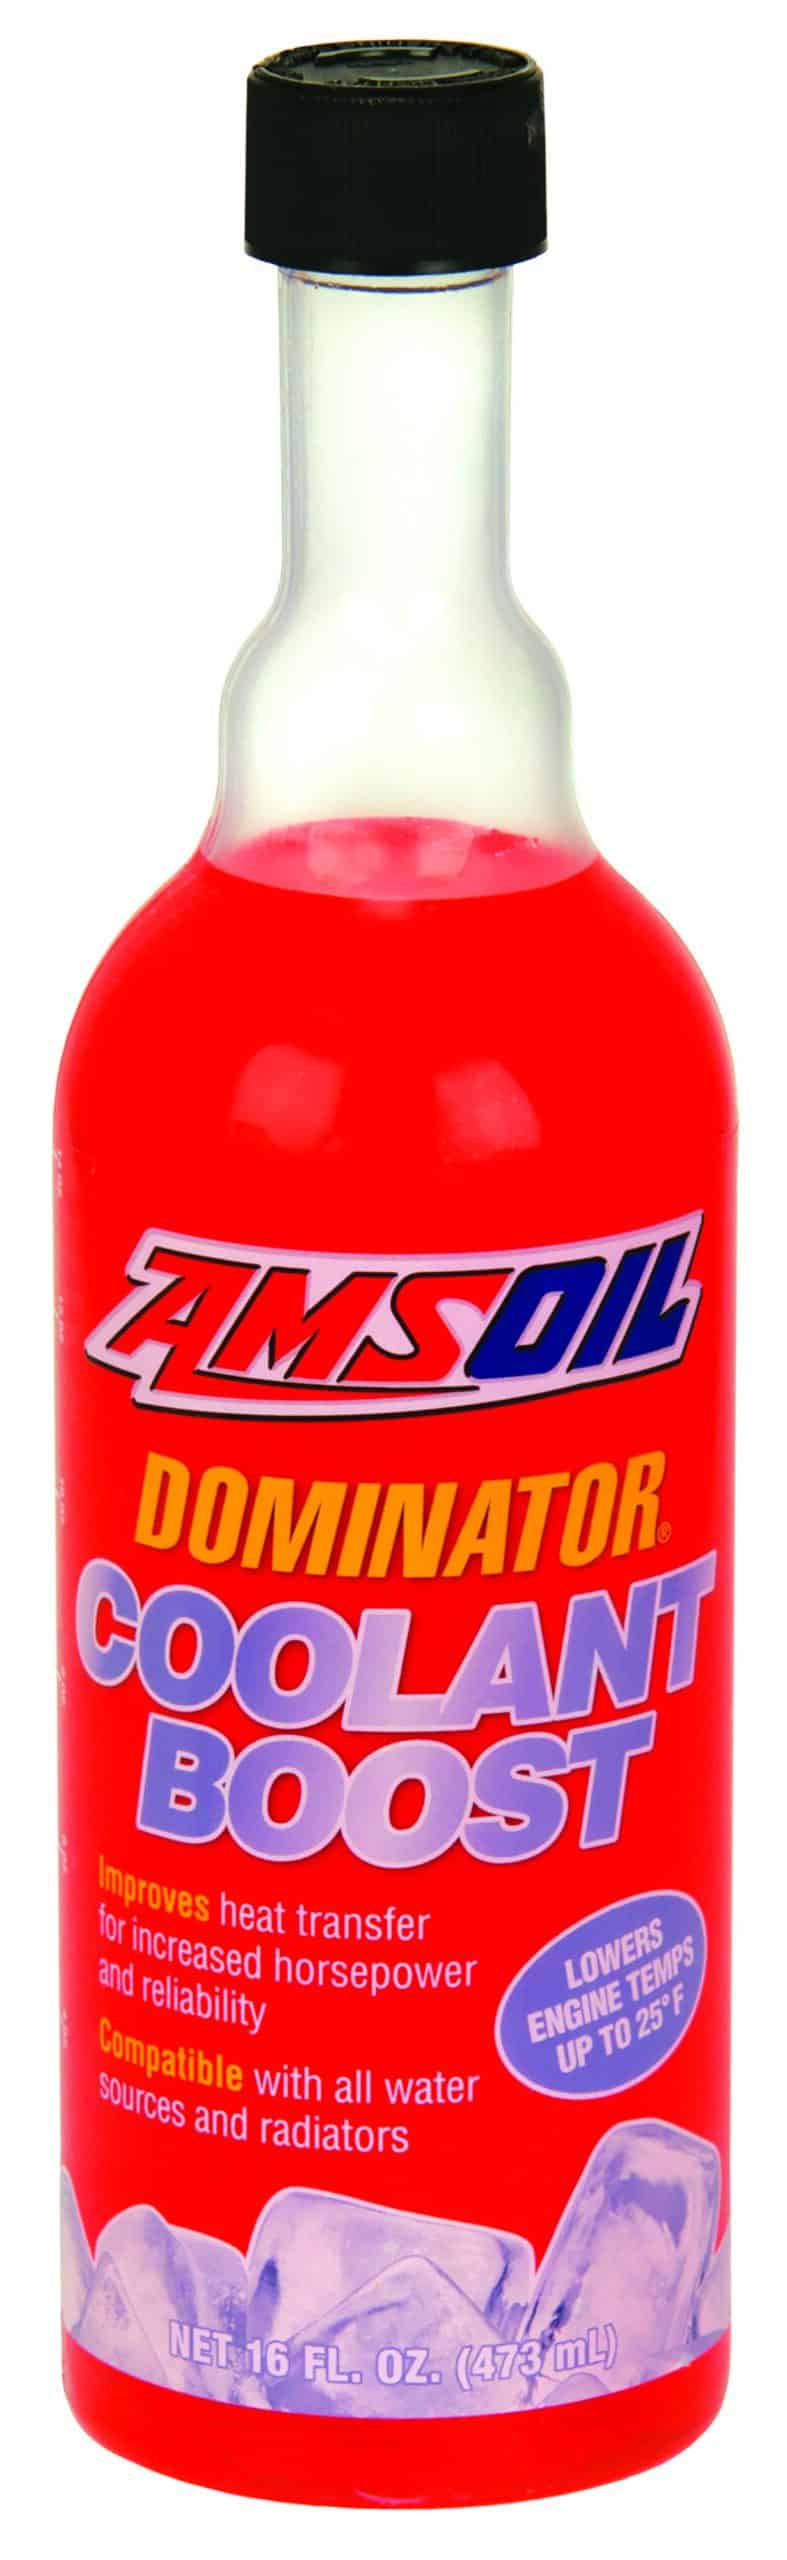 A bottle of AMSOIL DOMINATOR® Coolant Boost. It provides racers, motorists lower engine operating temperatures, faster warm-up times, advanced corrosion protection.